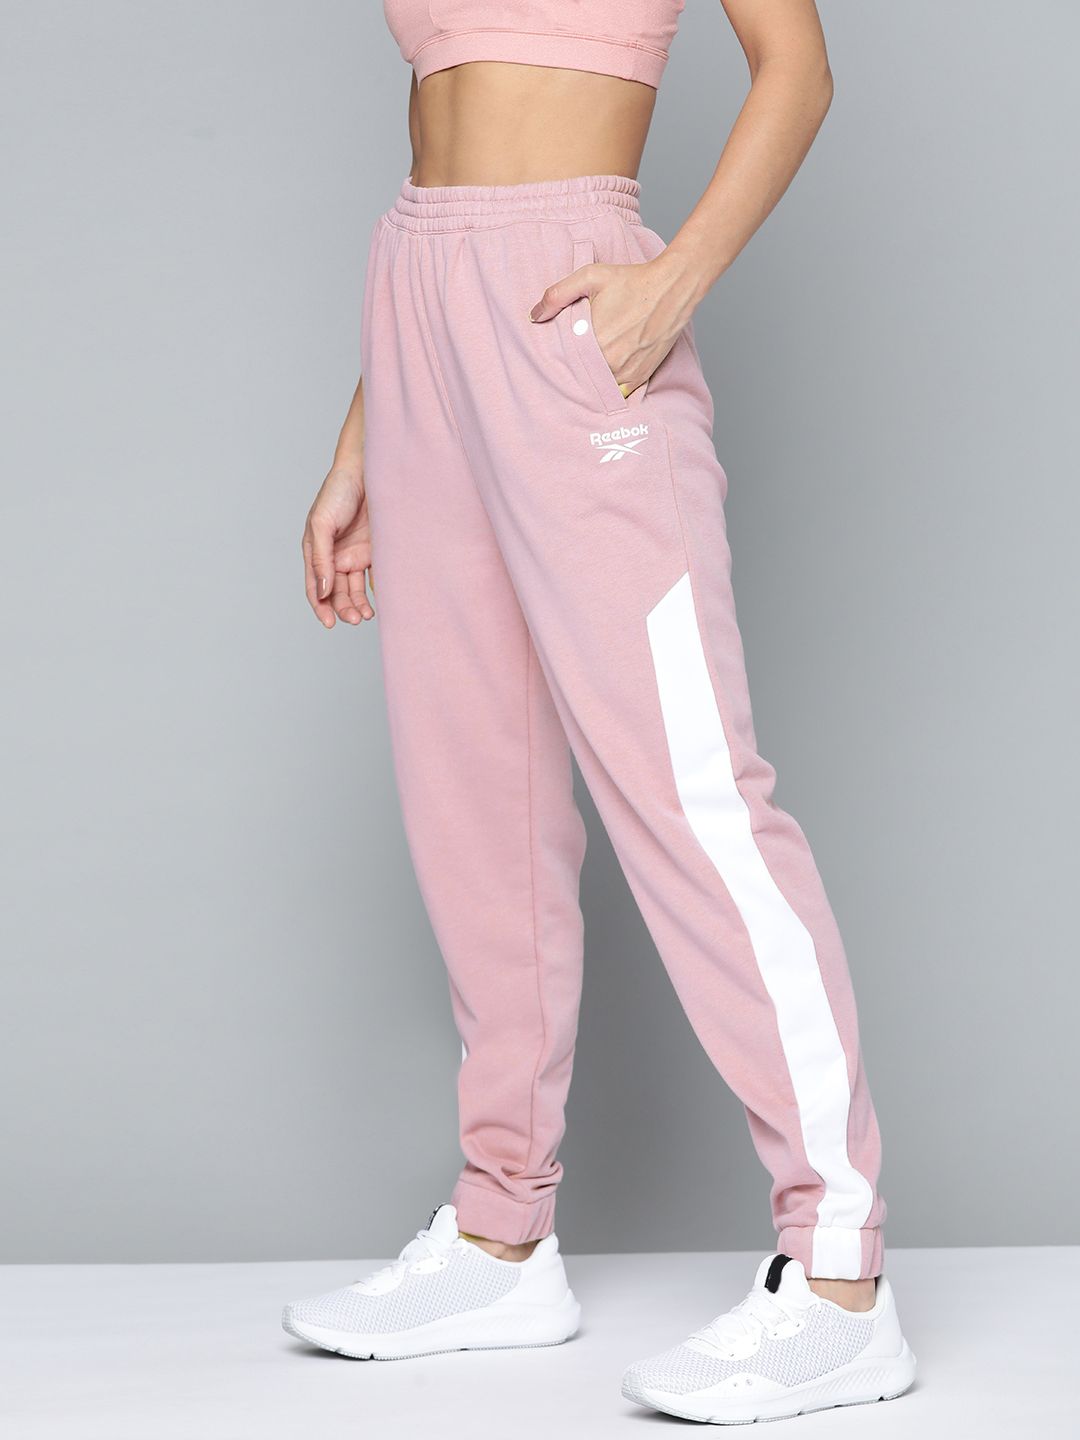 Reebok Classic Women Dusty Pink & White Colorblocked Joggers Price in India